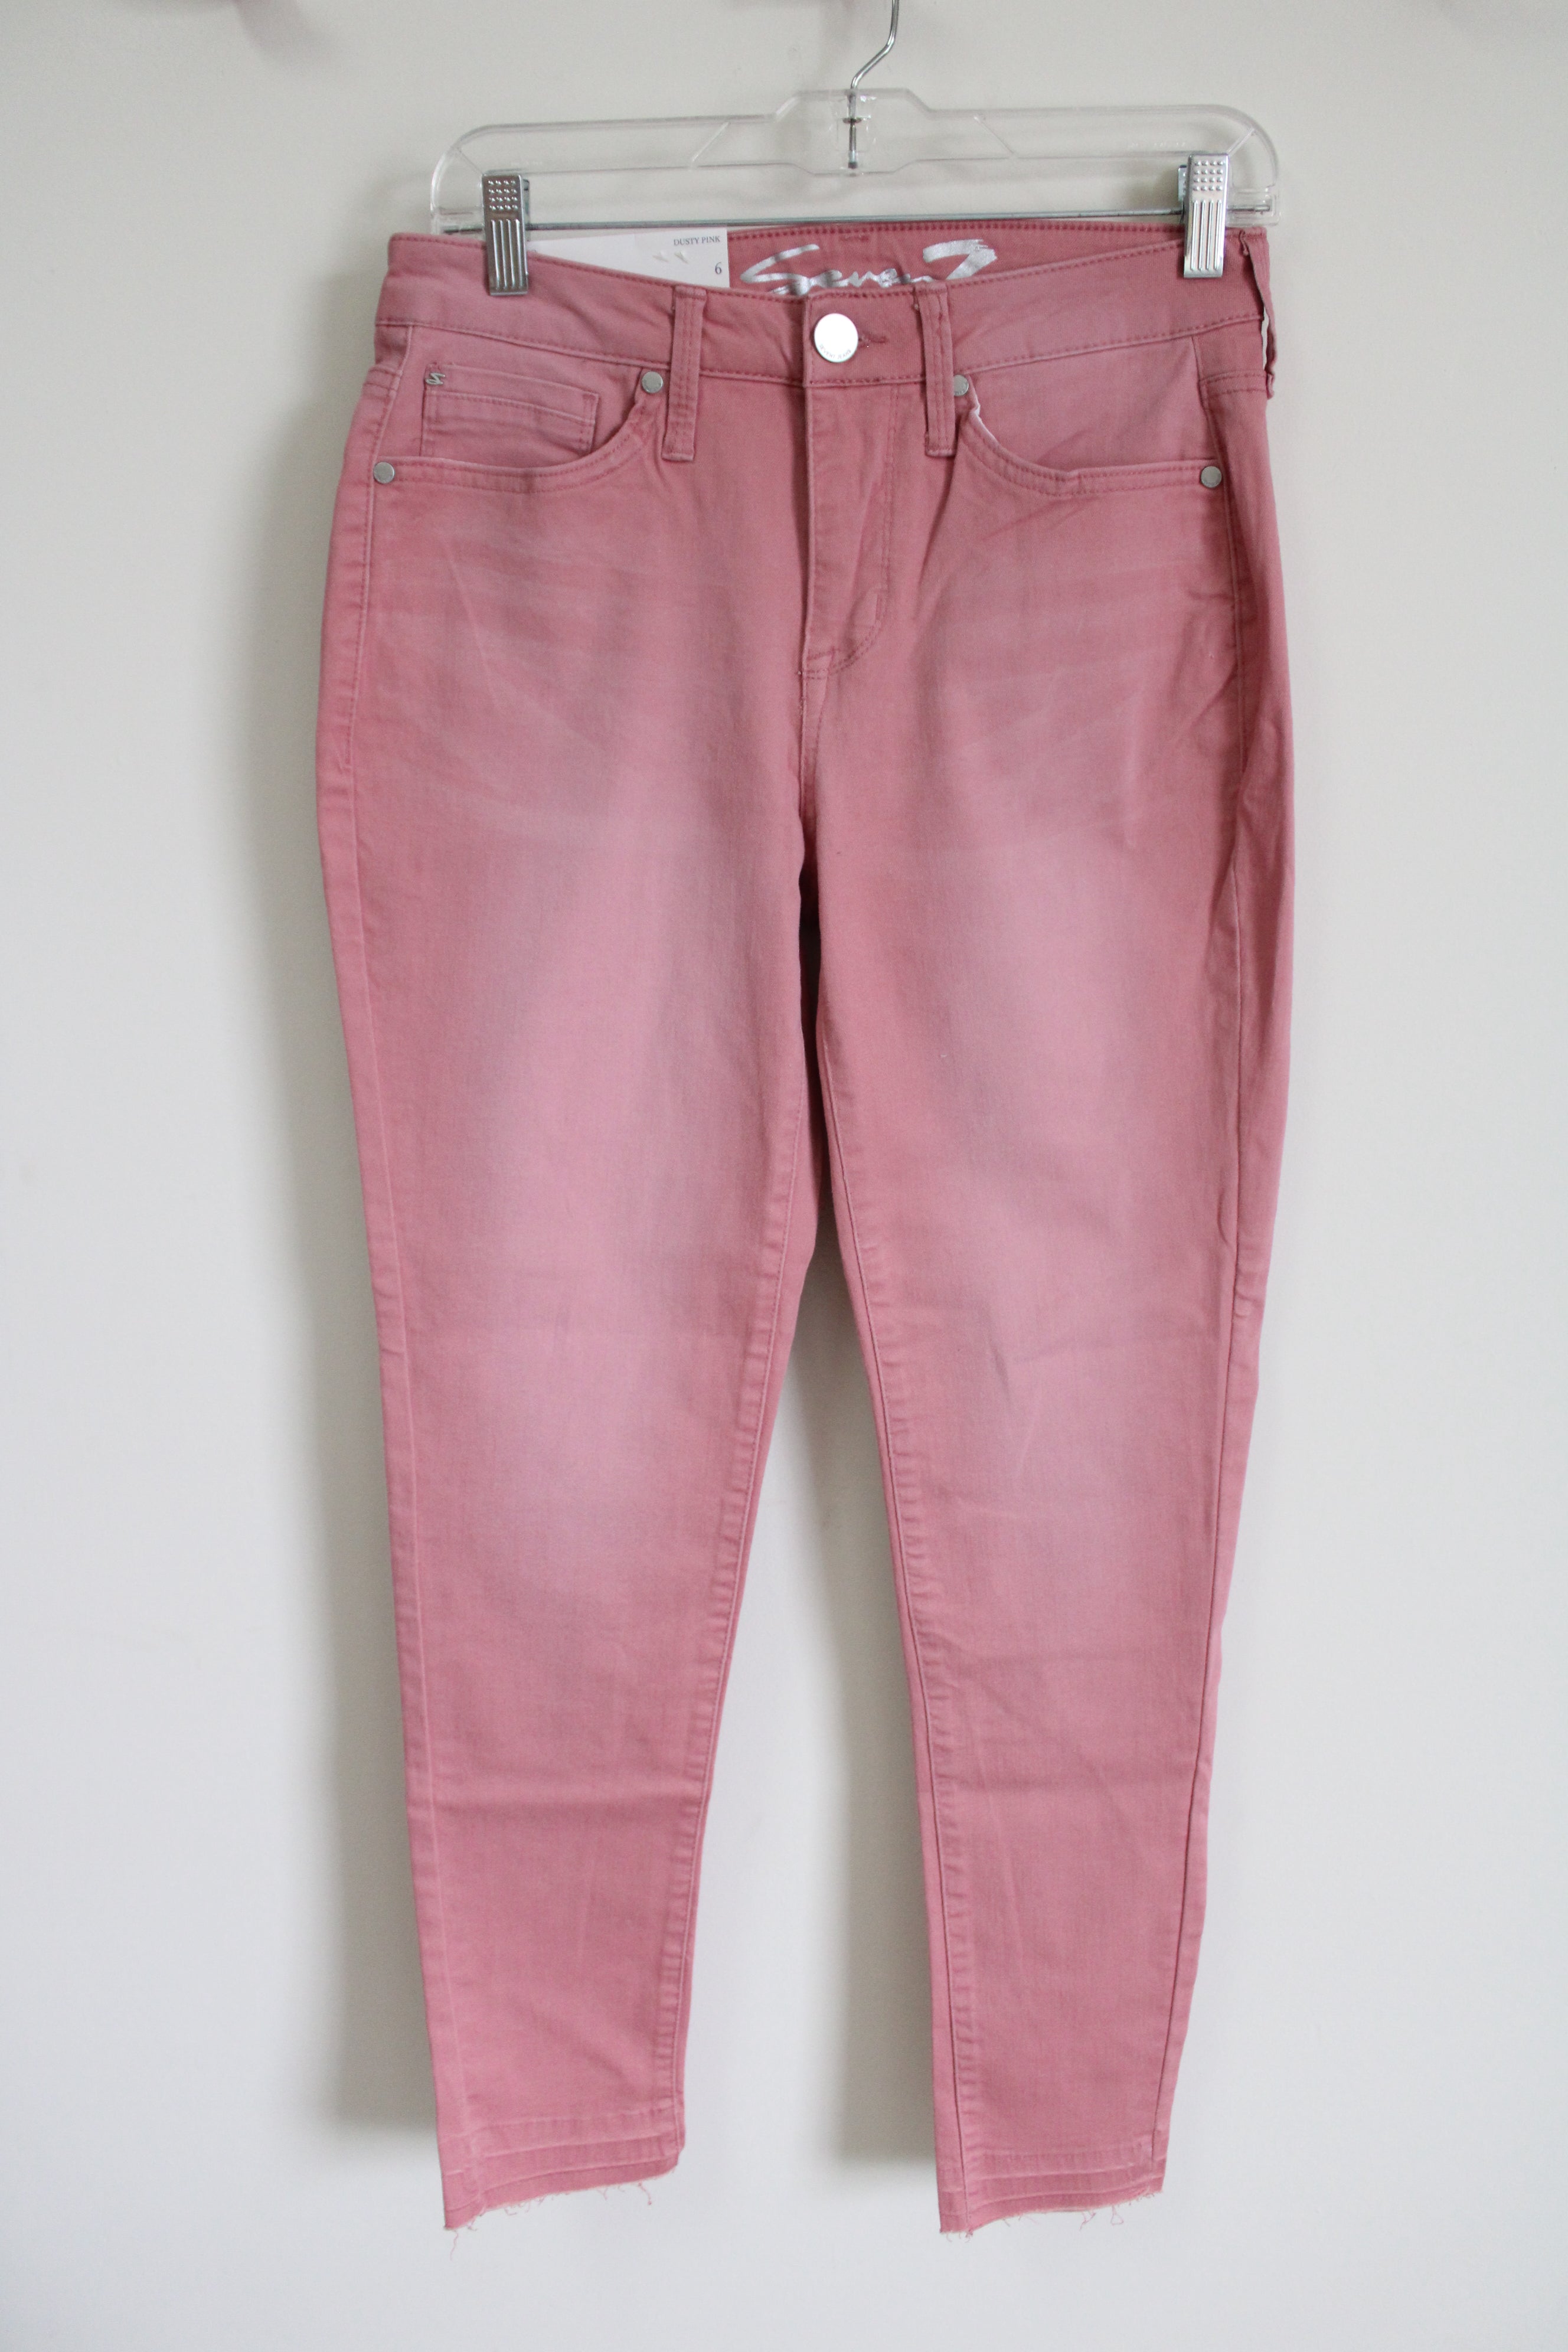 NEW Seven7 Pink Mid Rise Ankle Skinny Jeans | 6